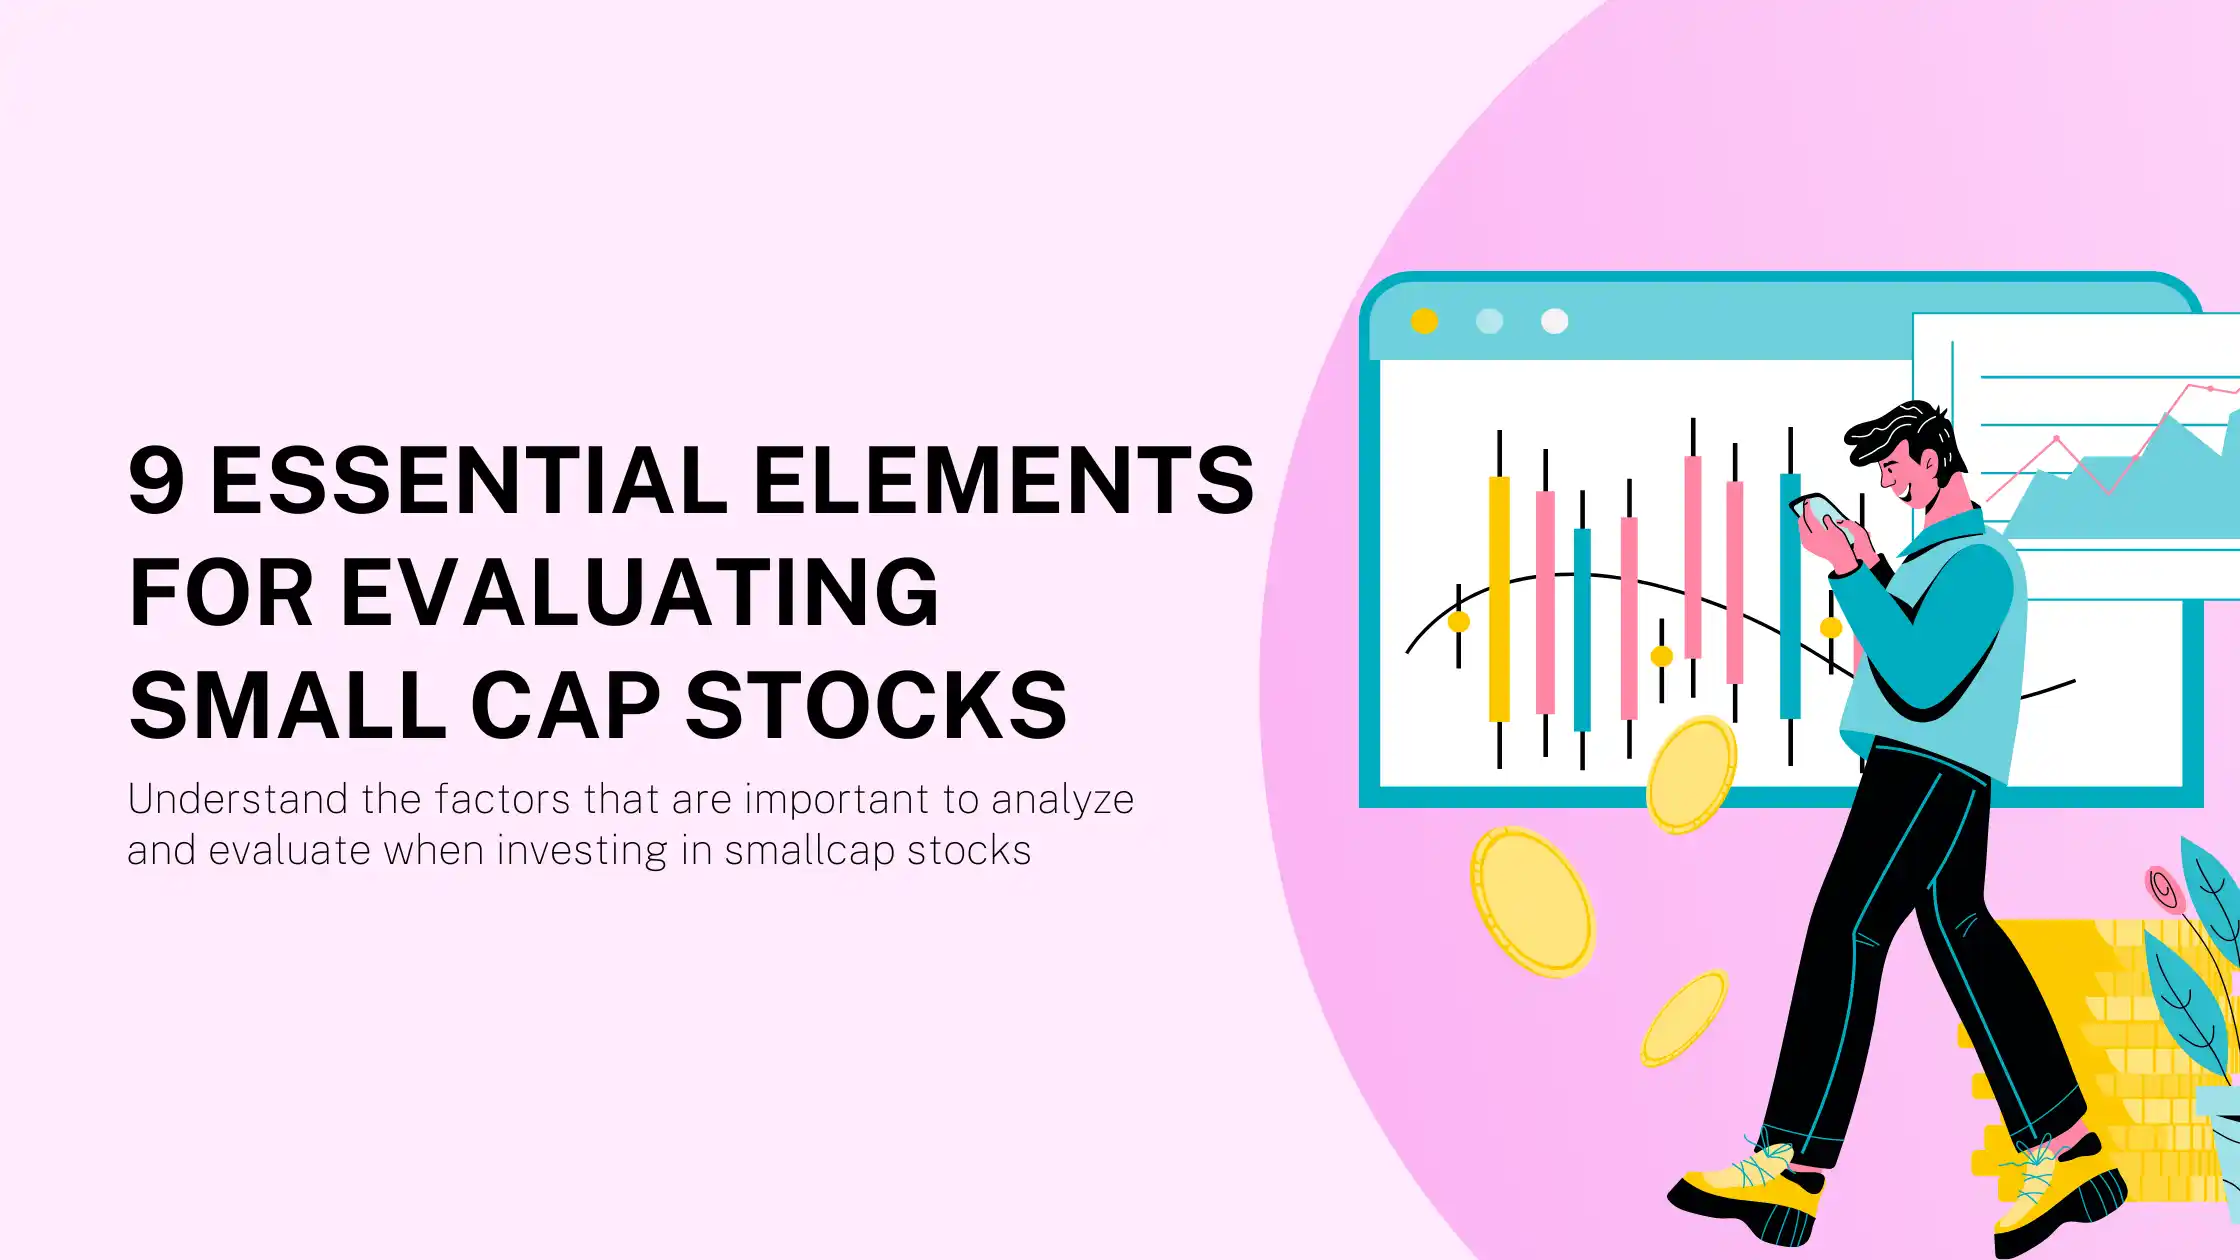 9 Essential Elements for Evaluating Small Cap Stocks